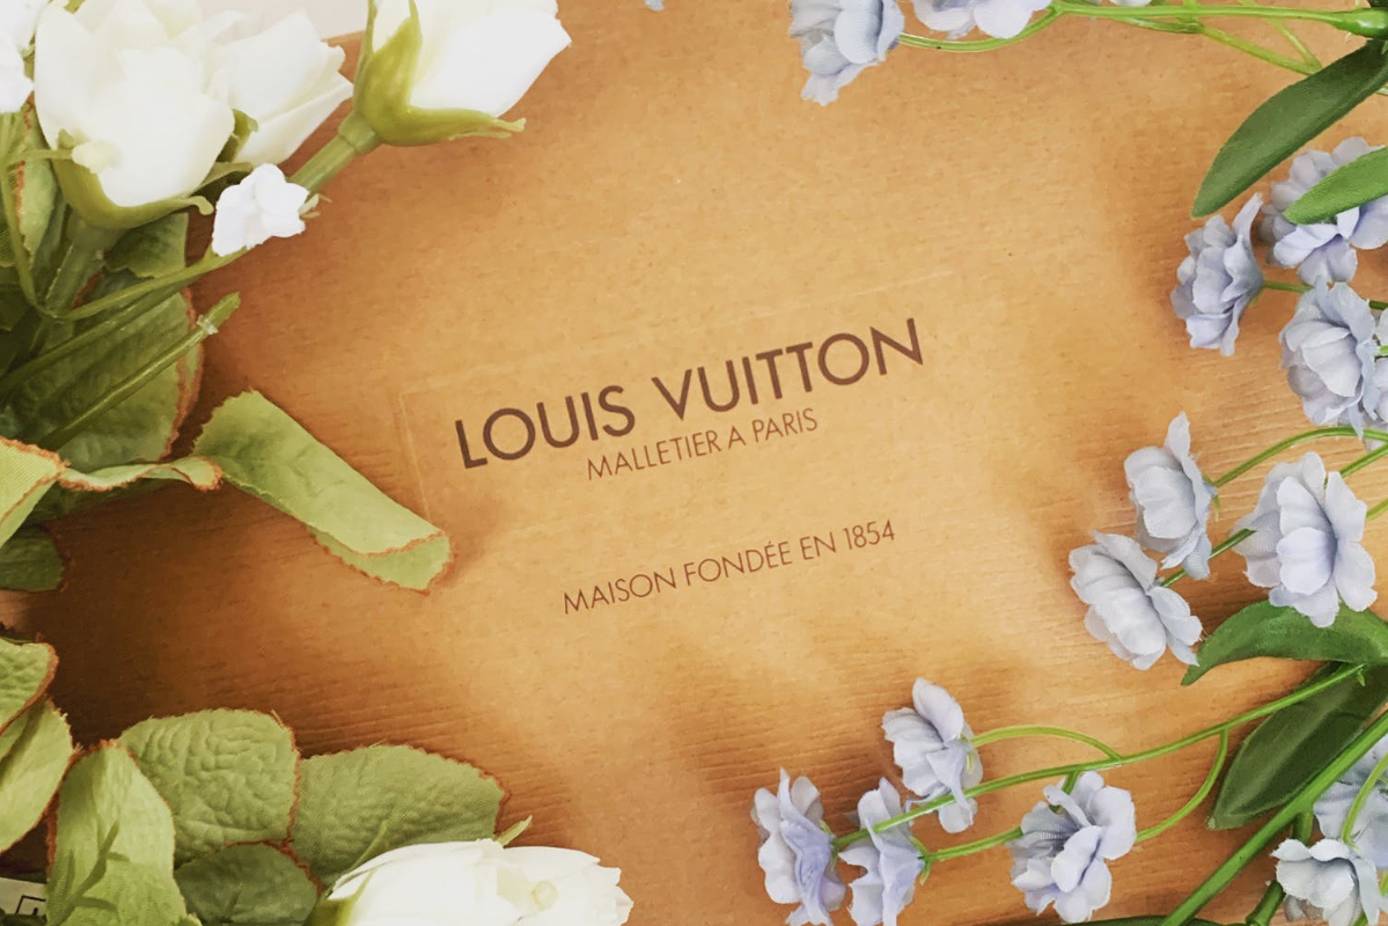 Louis Vuitton ranks as most valuable luxury company in